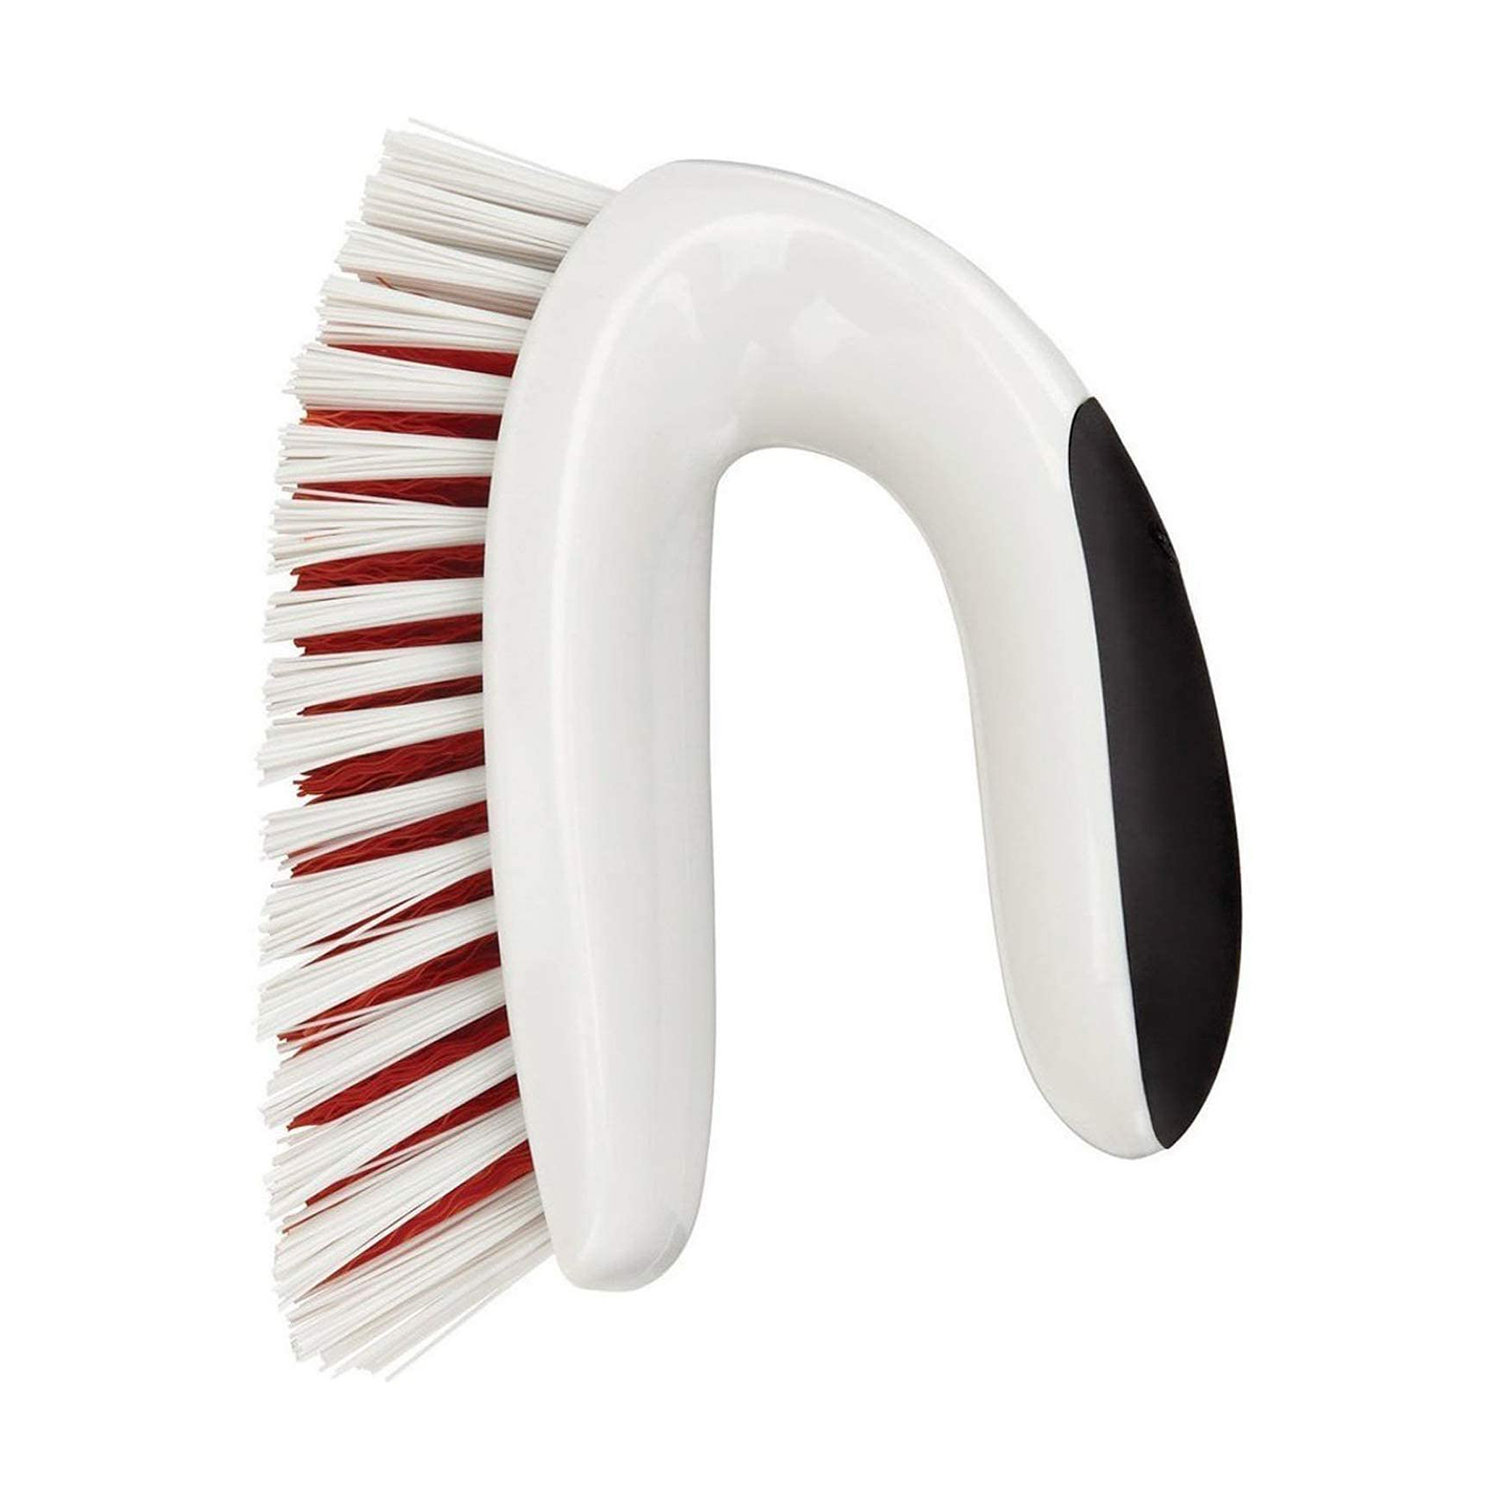 Oxo Good Grips Tile and Grout Brush